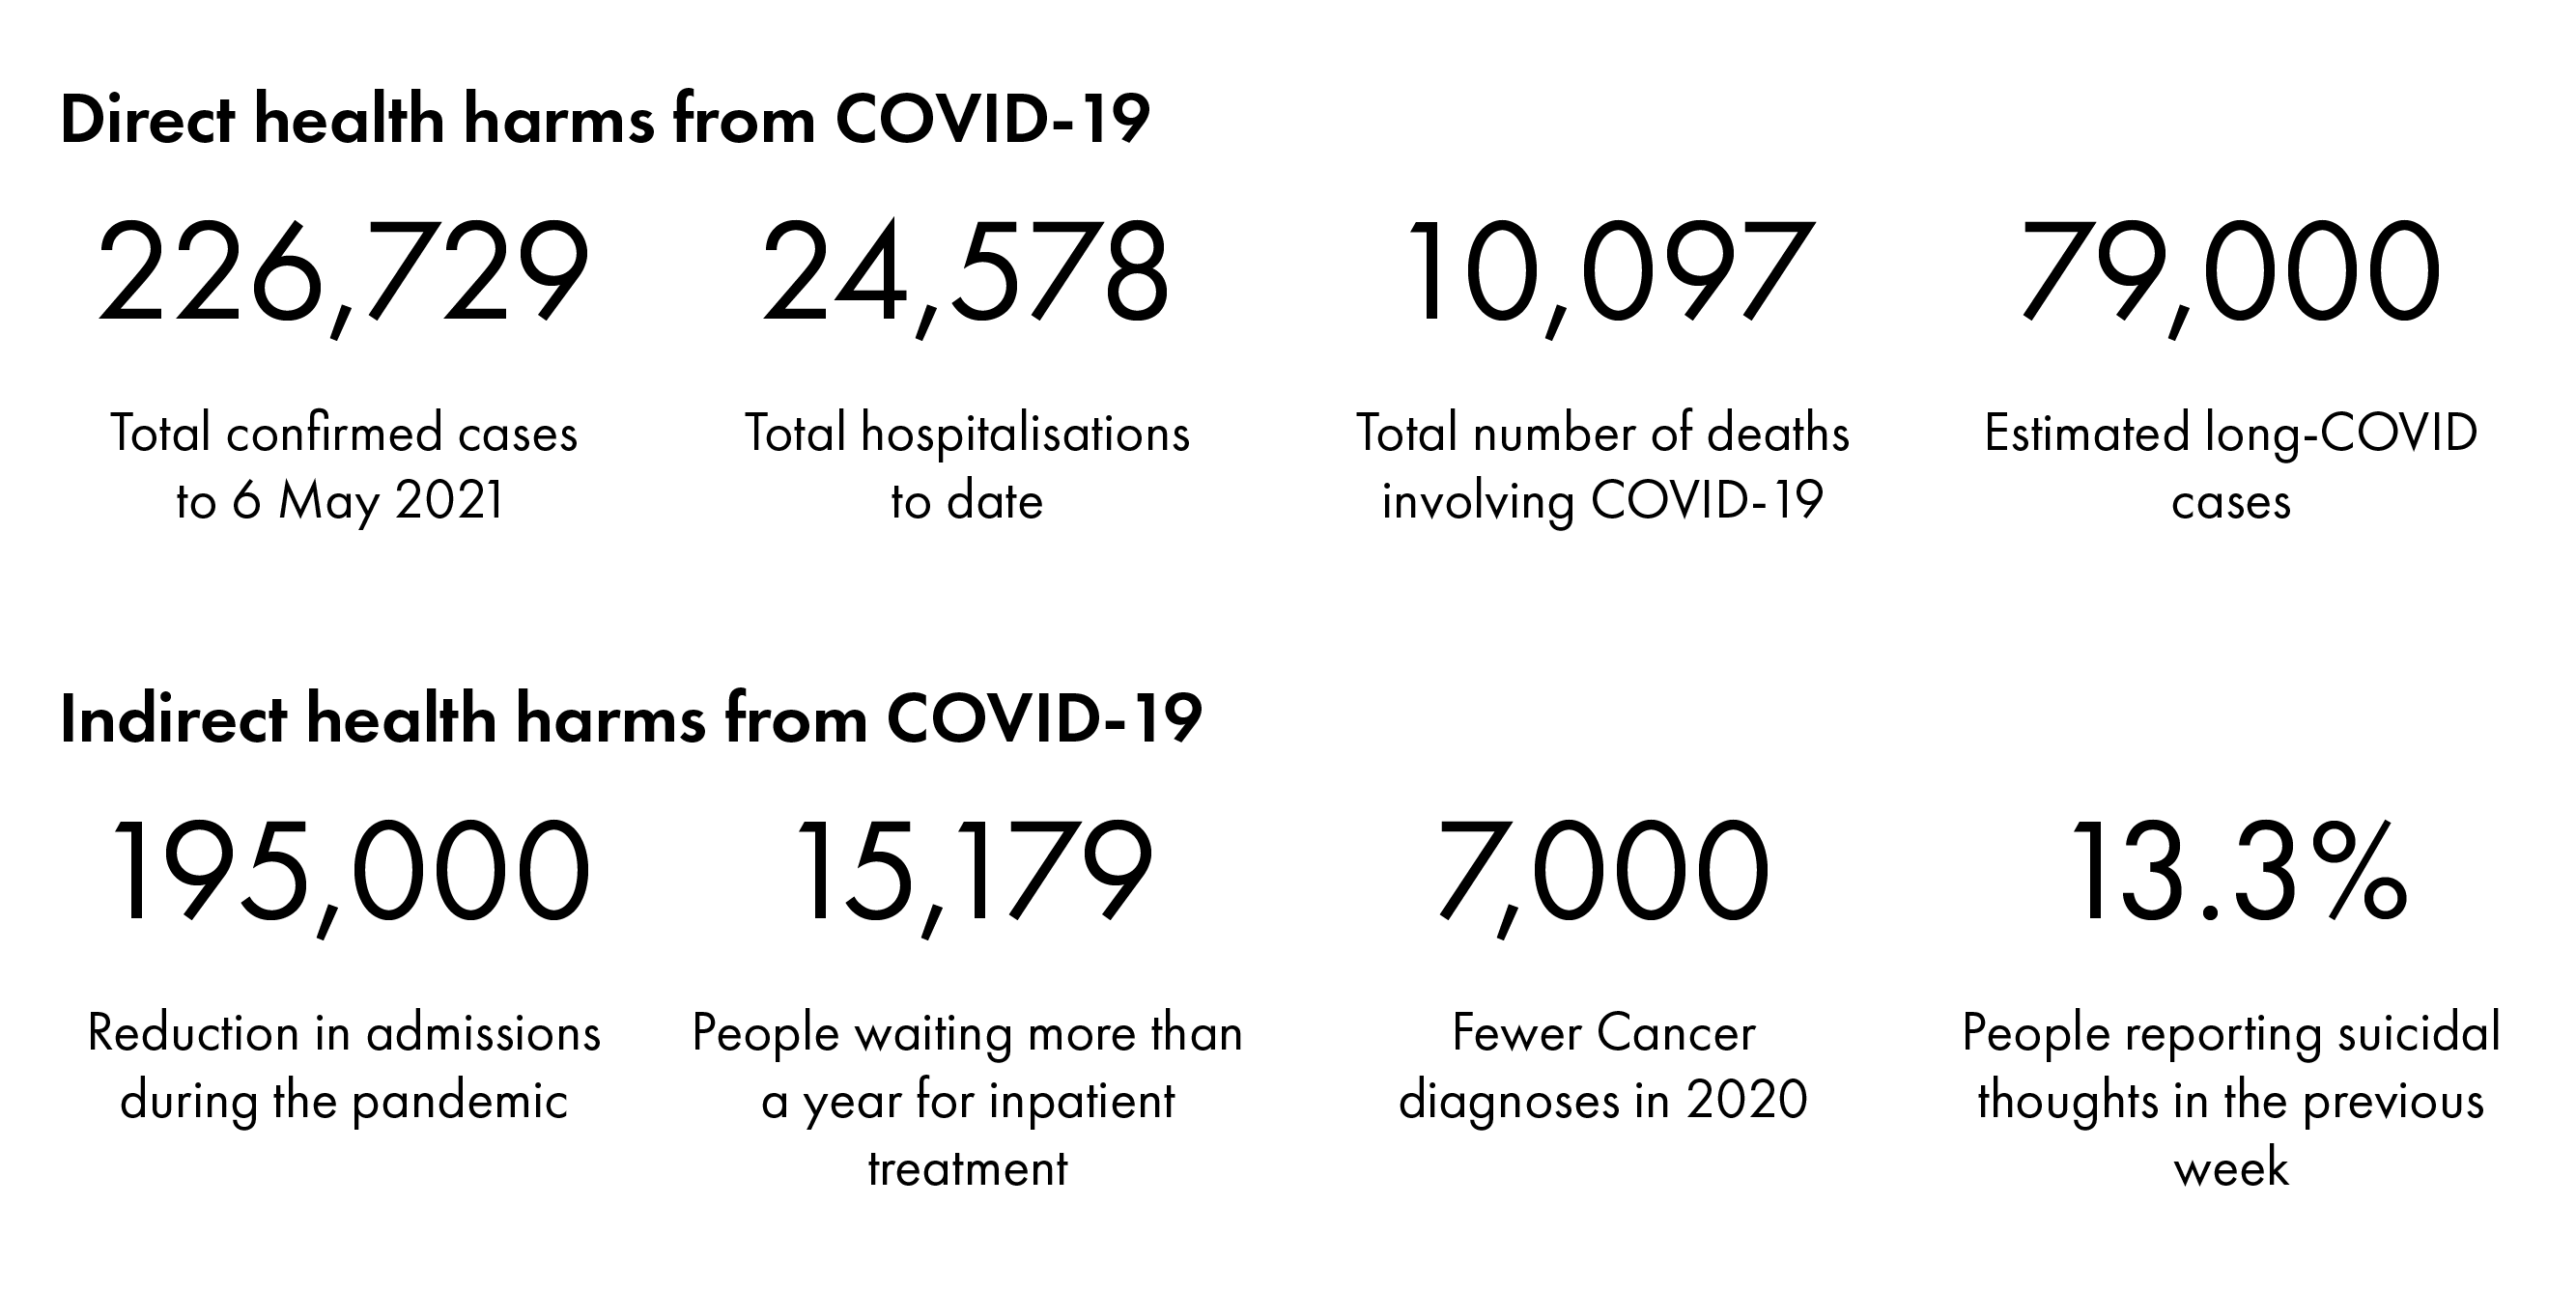 There have been 226,729 confirmed cases of COVID-19, 24,578 hospitalisations, 10,097 deaths and there an estimated 79,000 cases of long COVID.